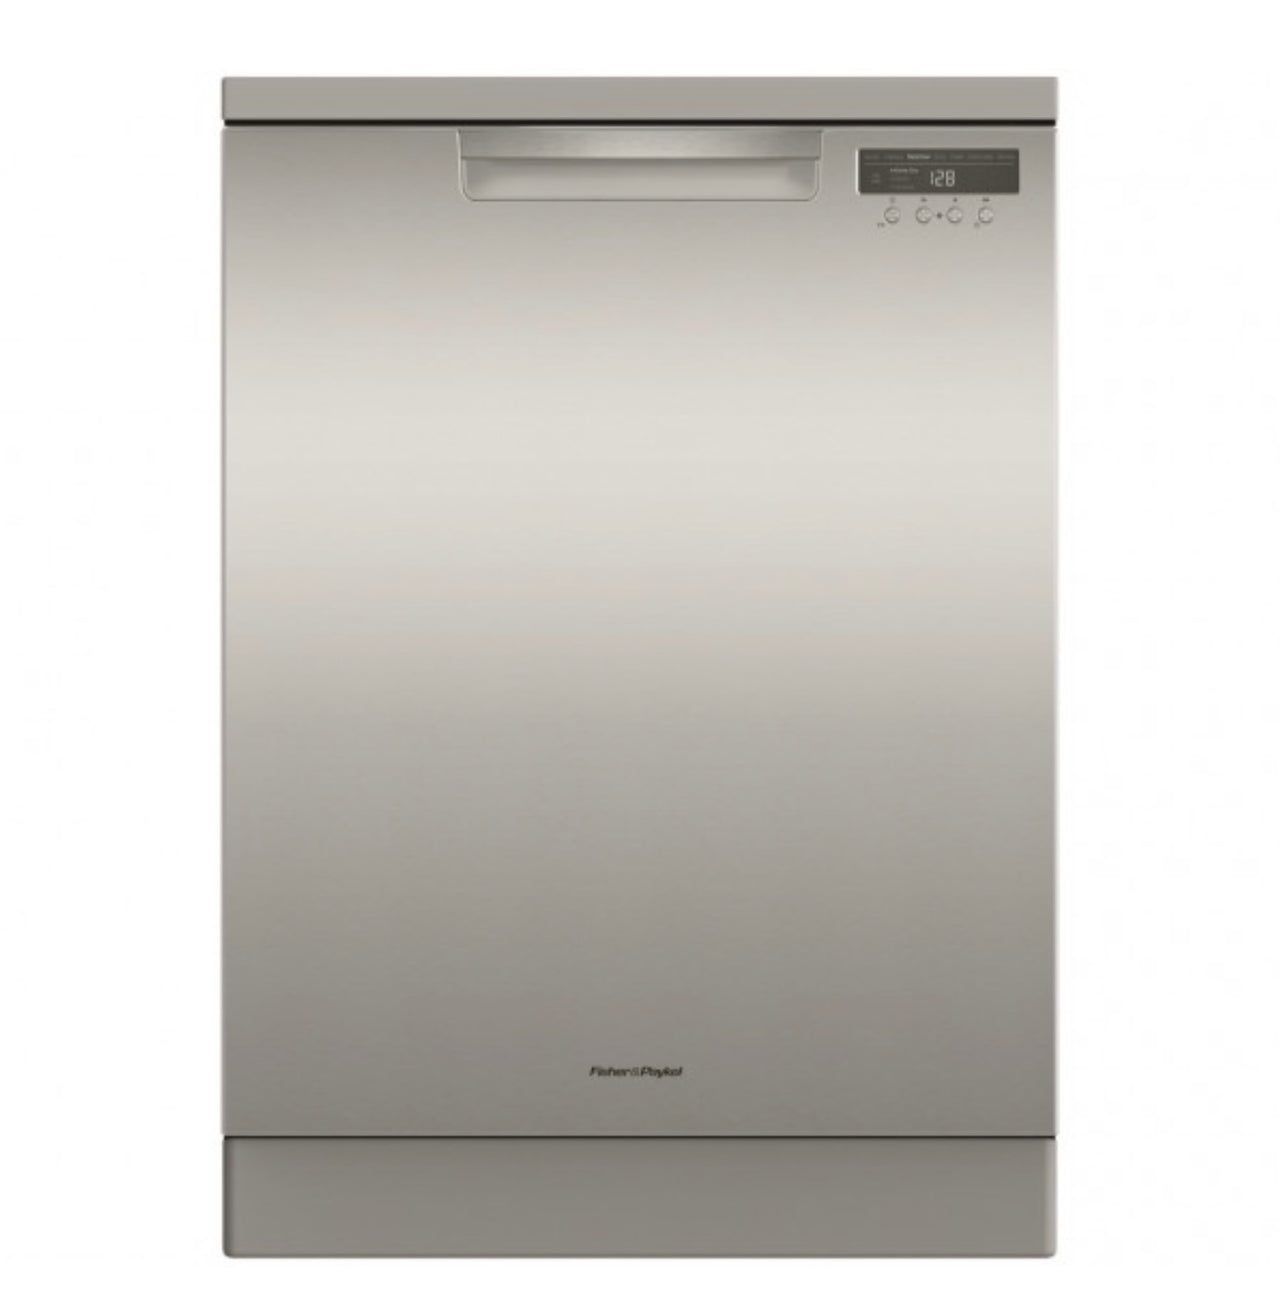 Factory second Fisher & Paykel 60cm Stainless Steel Dishwasher DW60FC6X1 - Second Hand Appliances Geebung